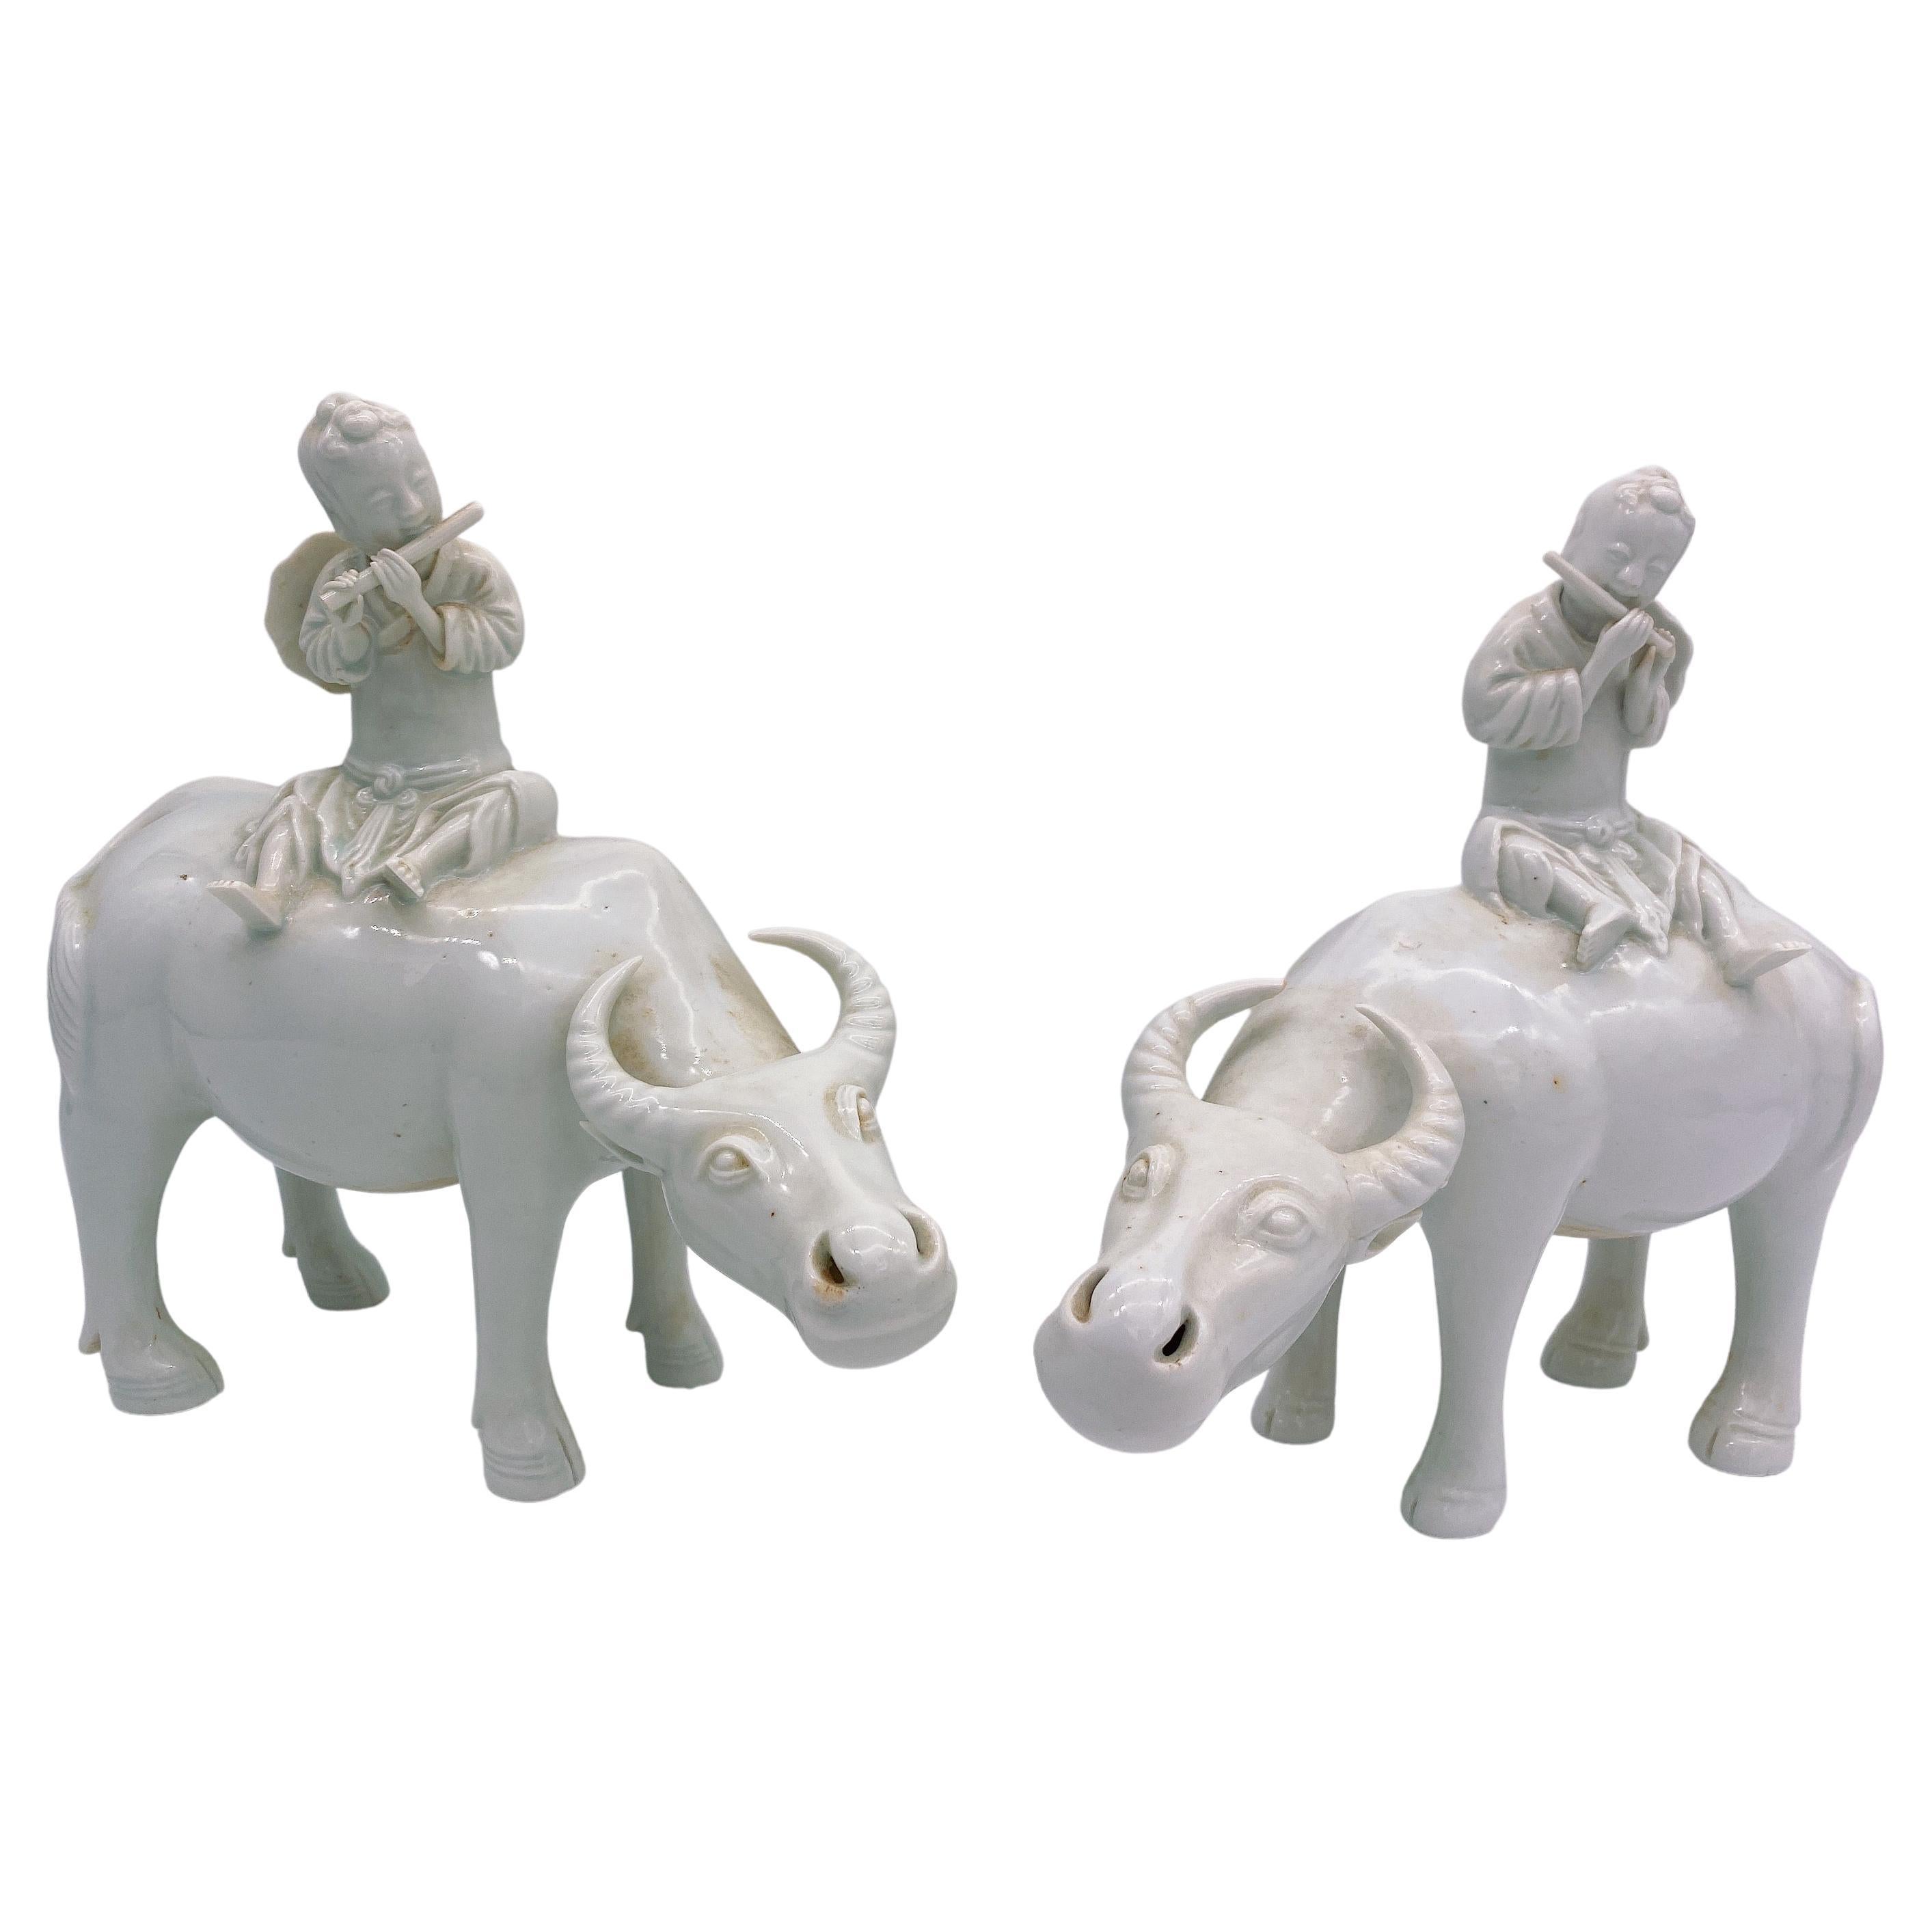 Antique Pair of Chinese Dehua Porcelain Figures of Boys on Water Buffalos For Sale